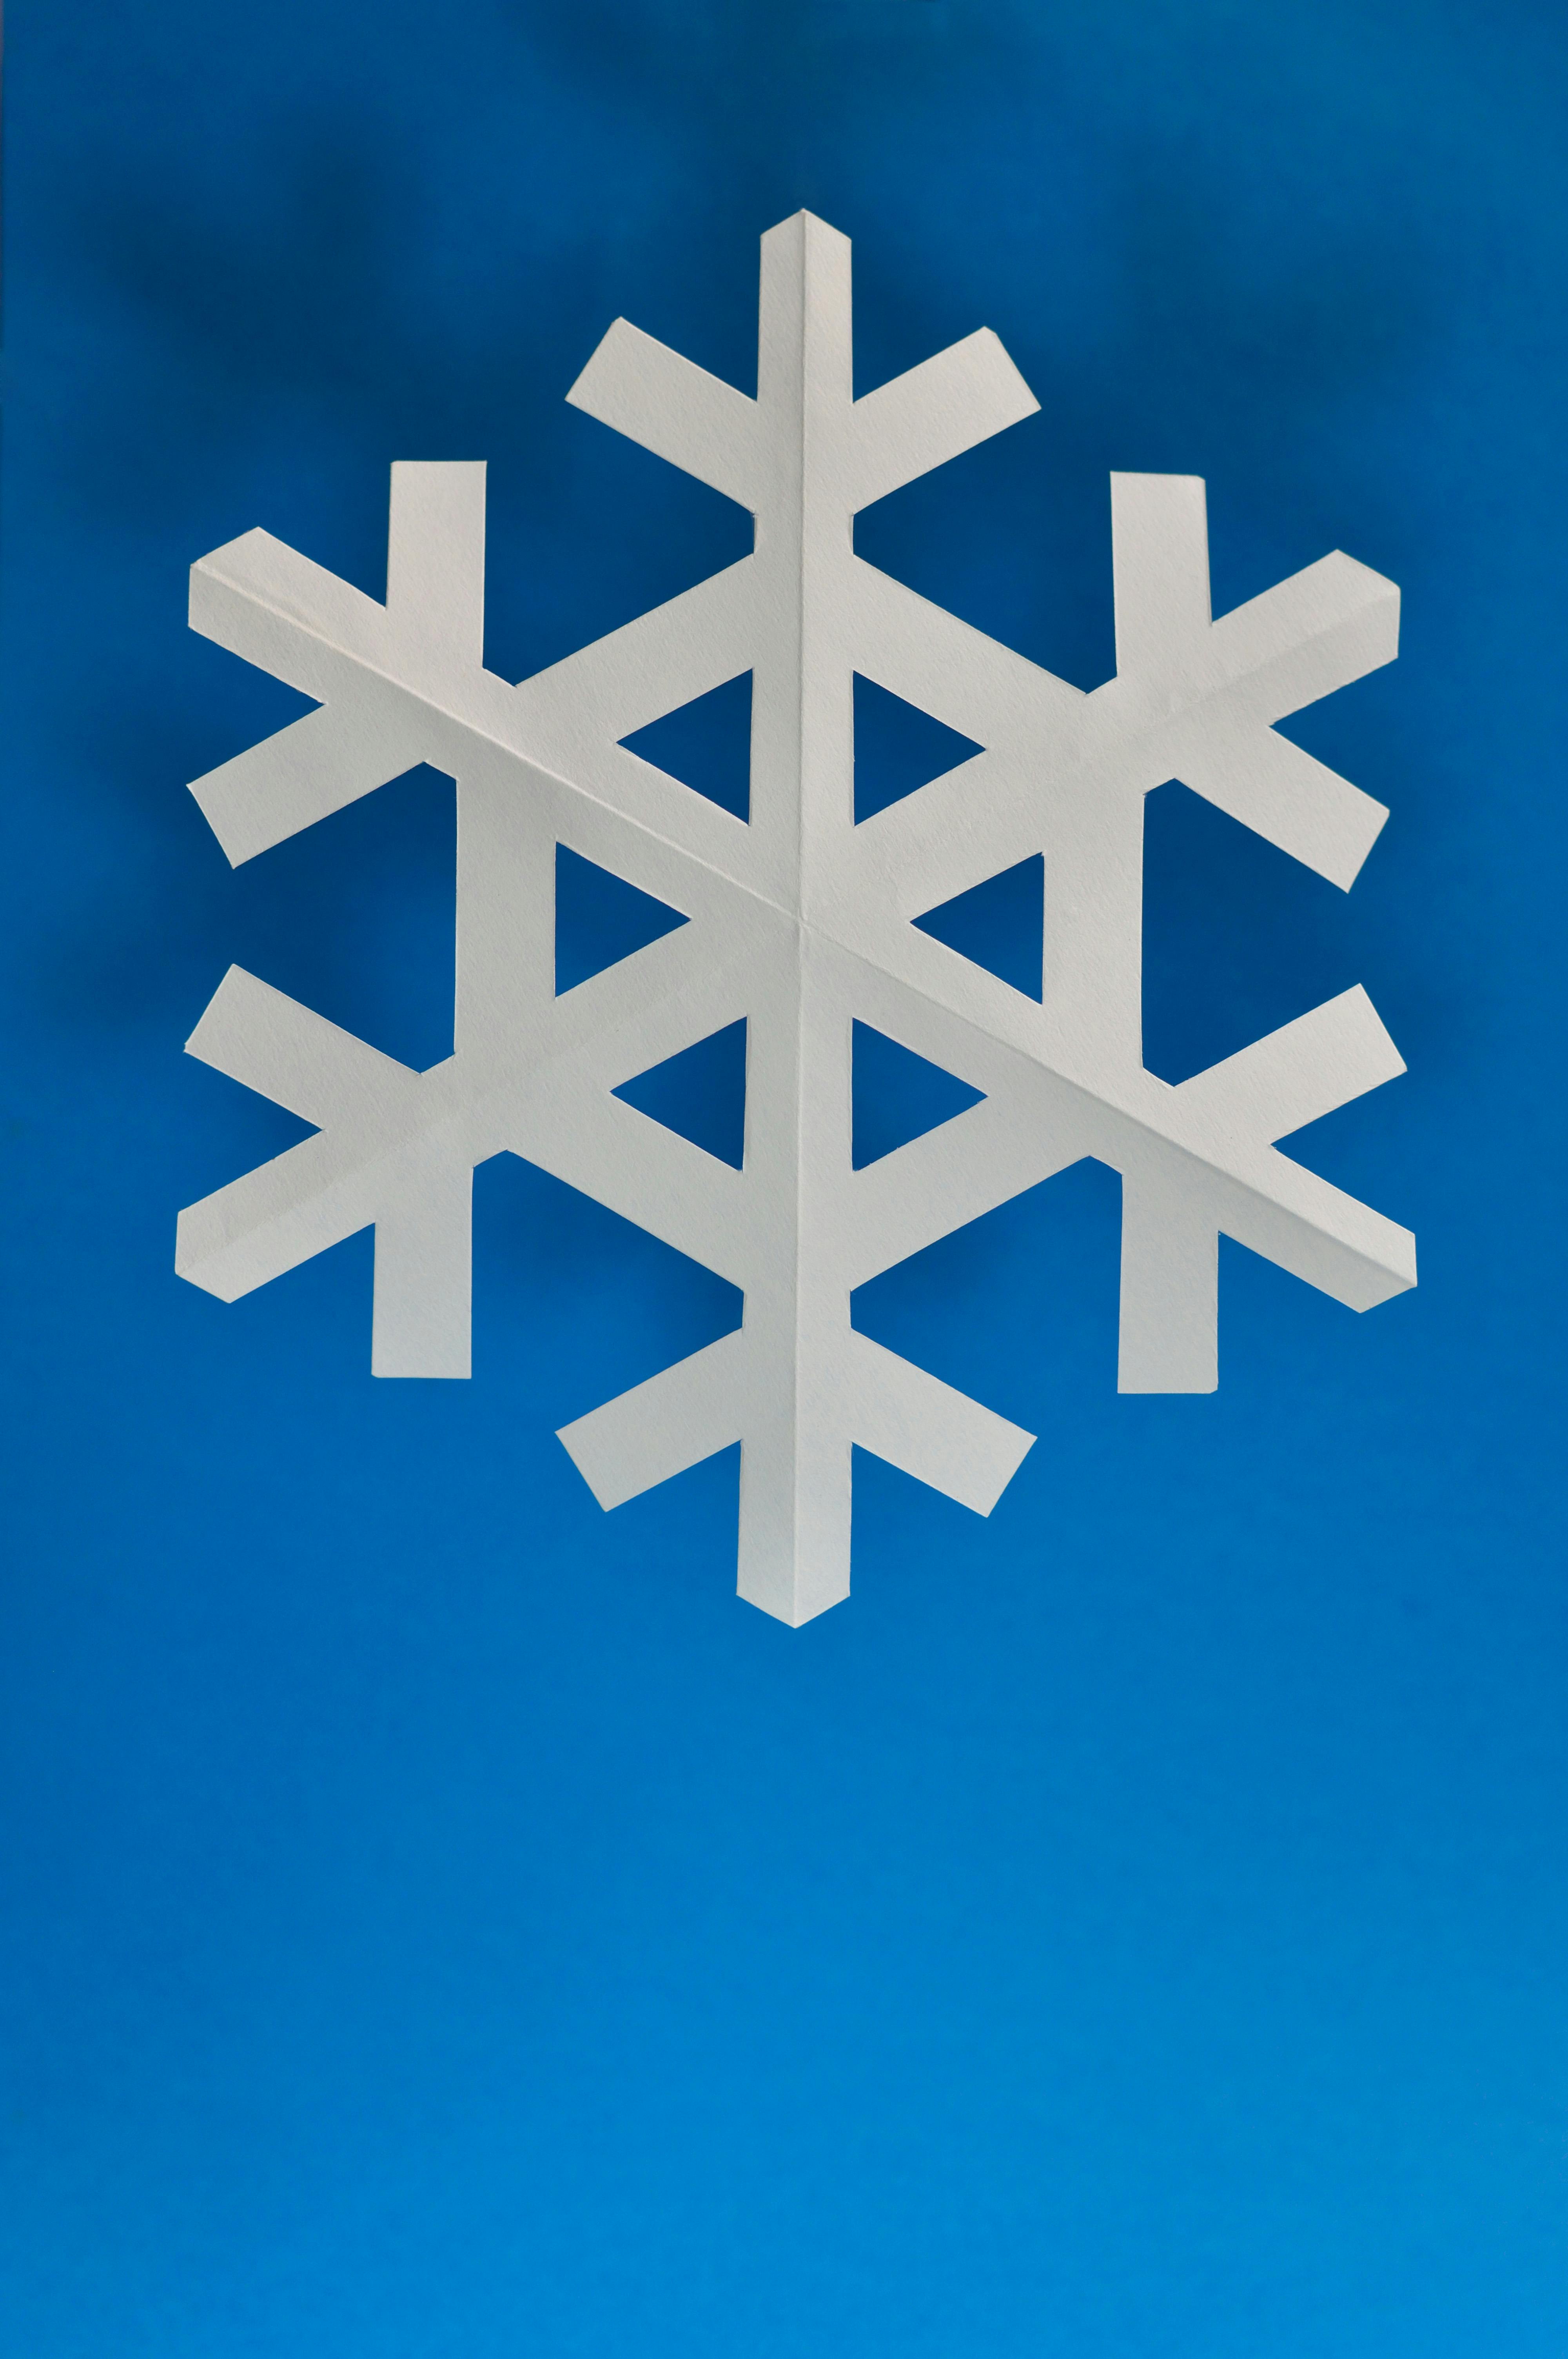 HD wallpaper Snowflake blue winter white cold 3d and abstract   Wallpaper Flare